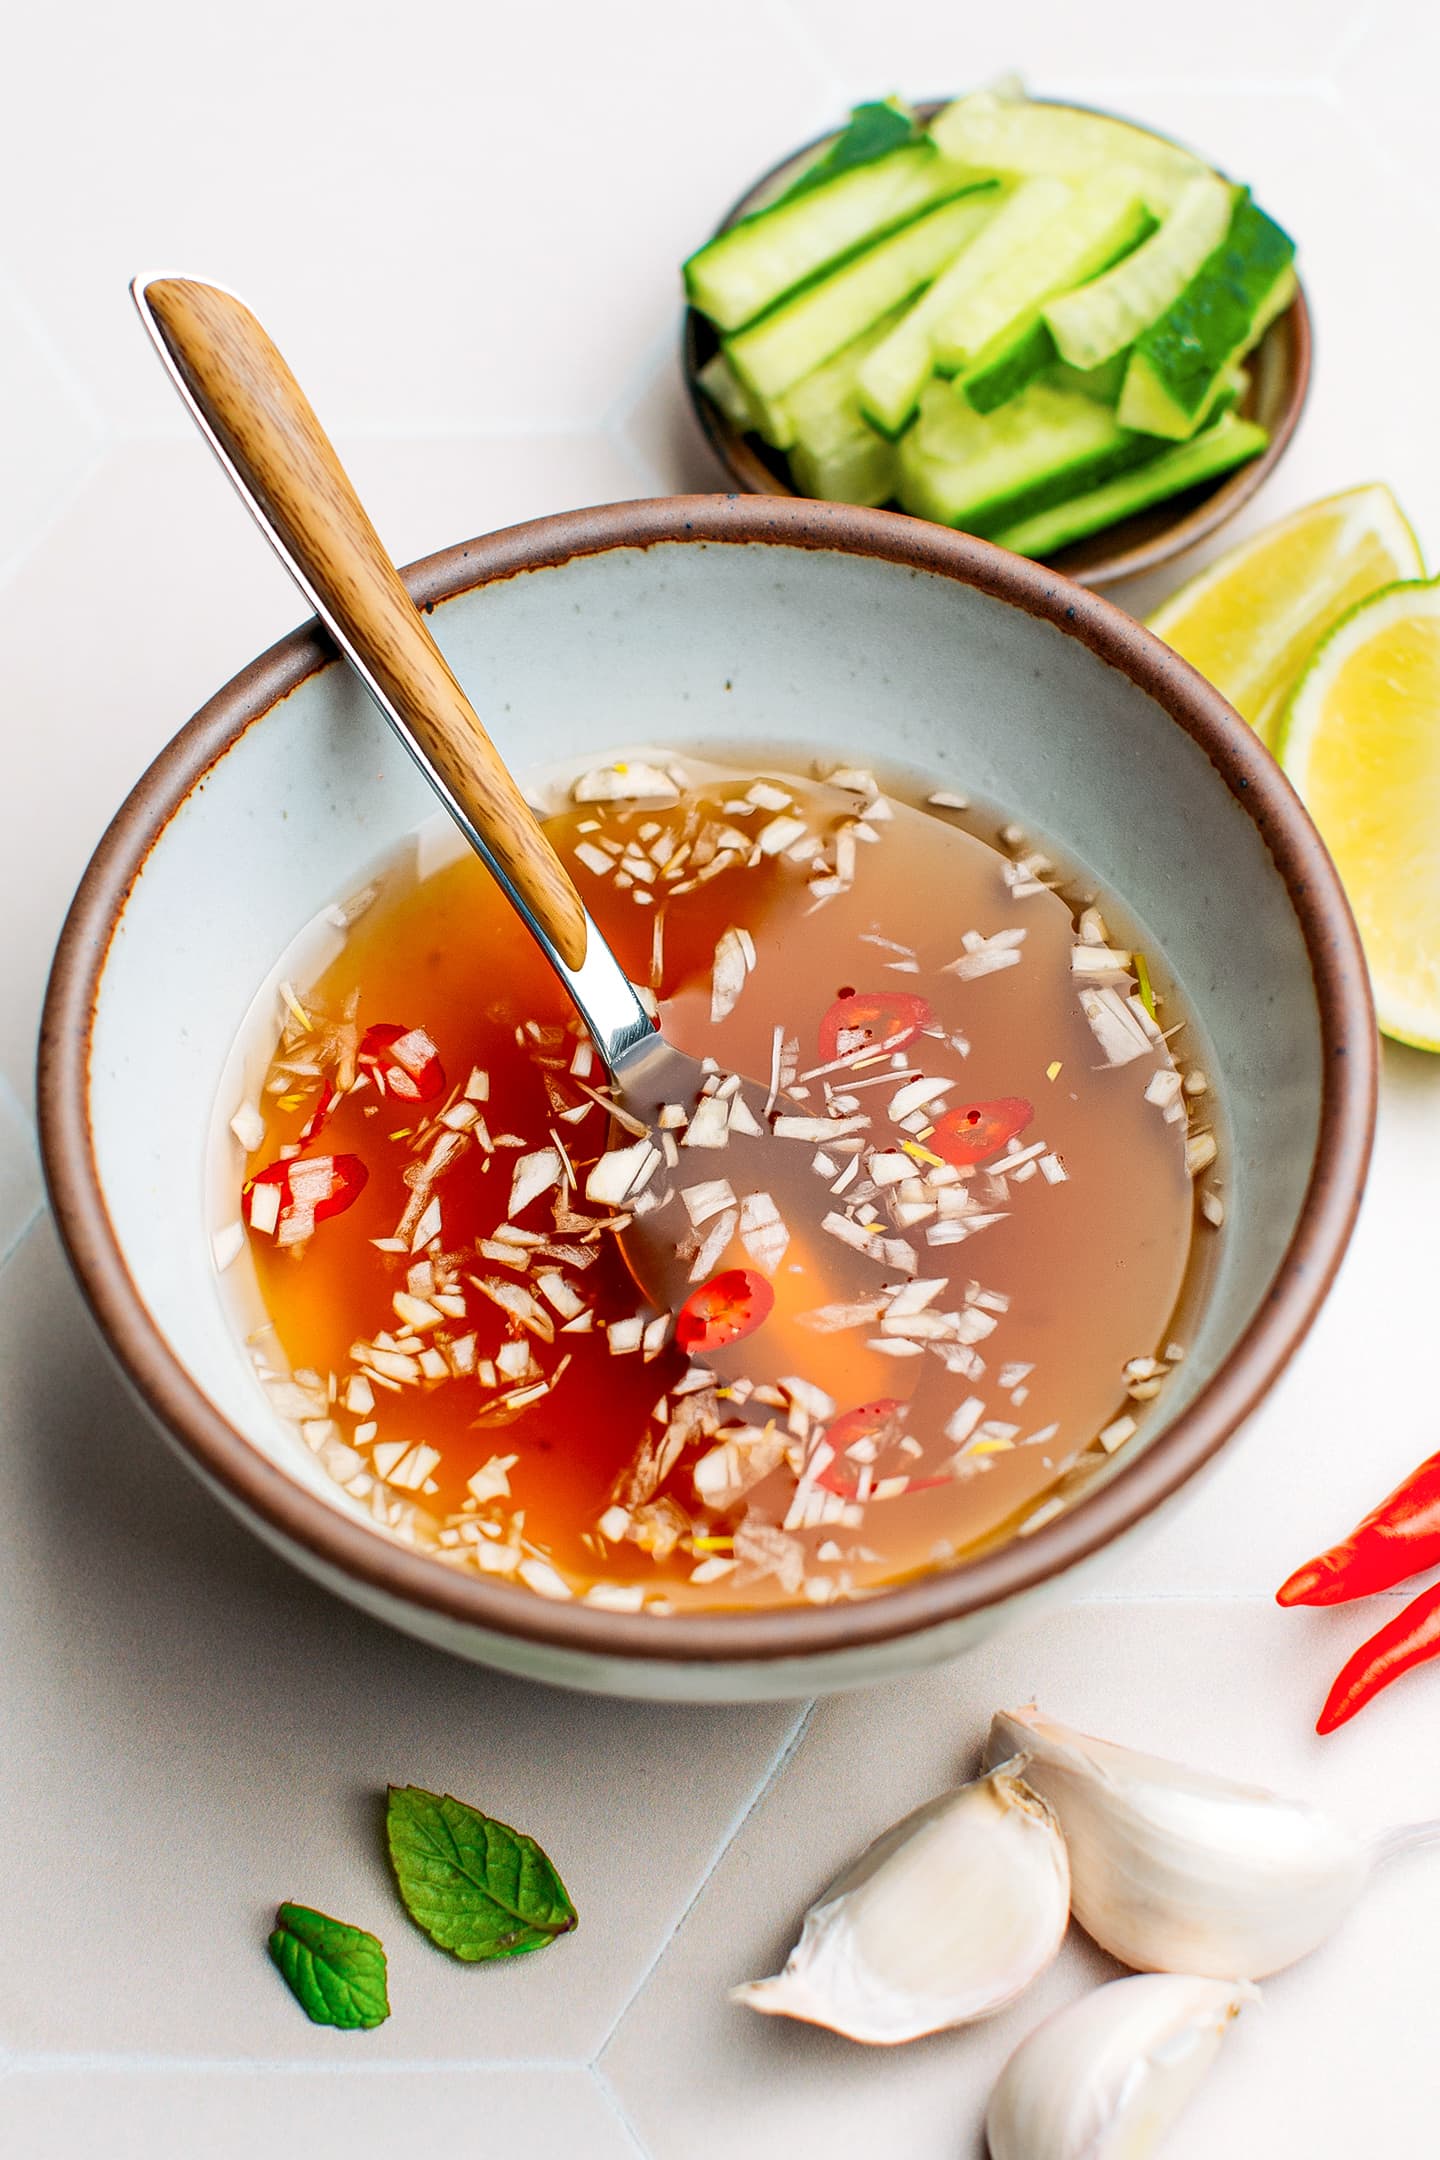 Vietnamese dipping sauce with garlic and chili in a bowl.